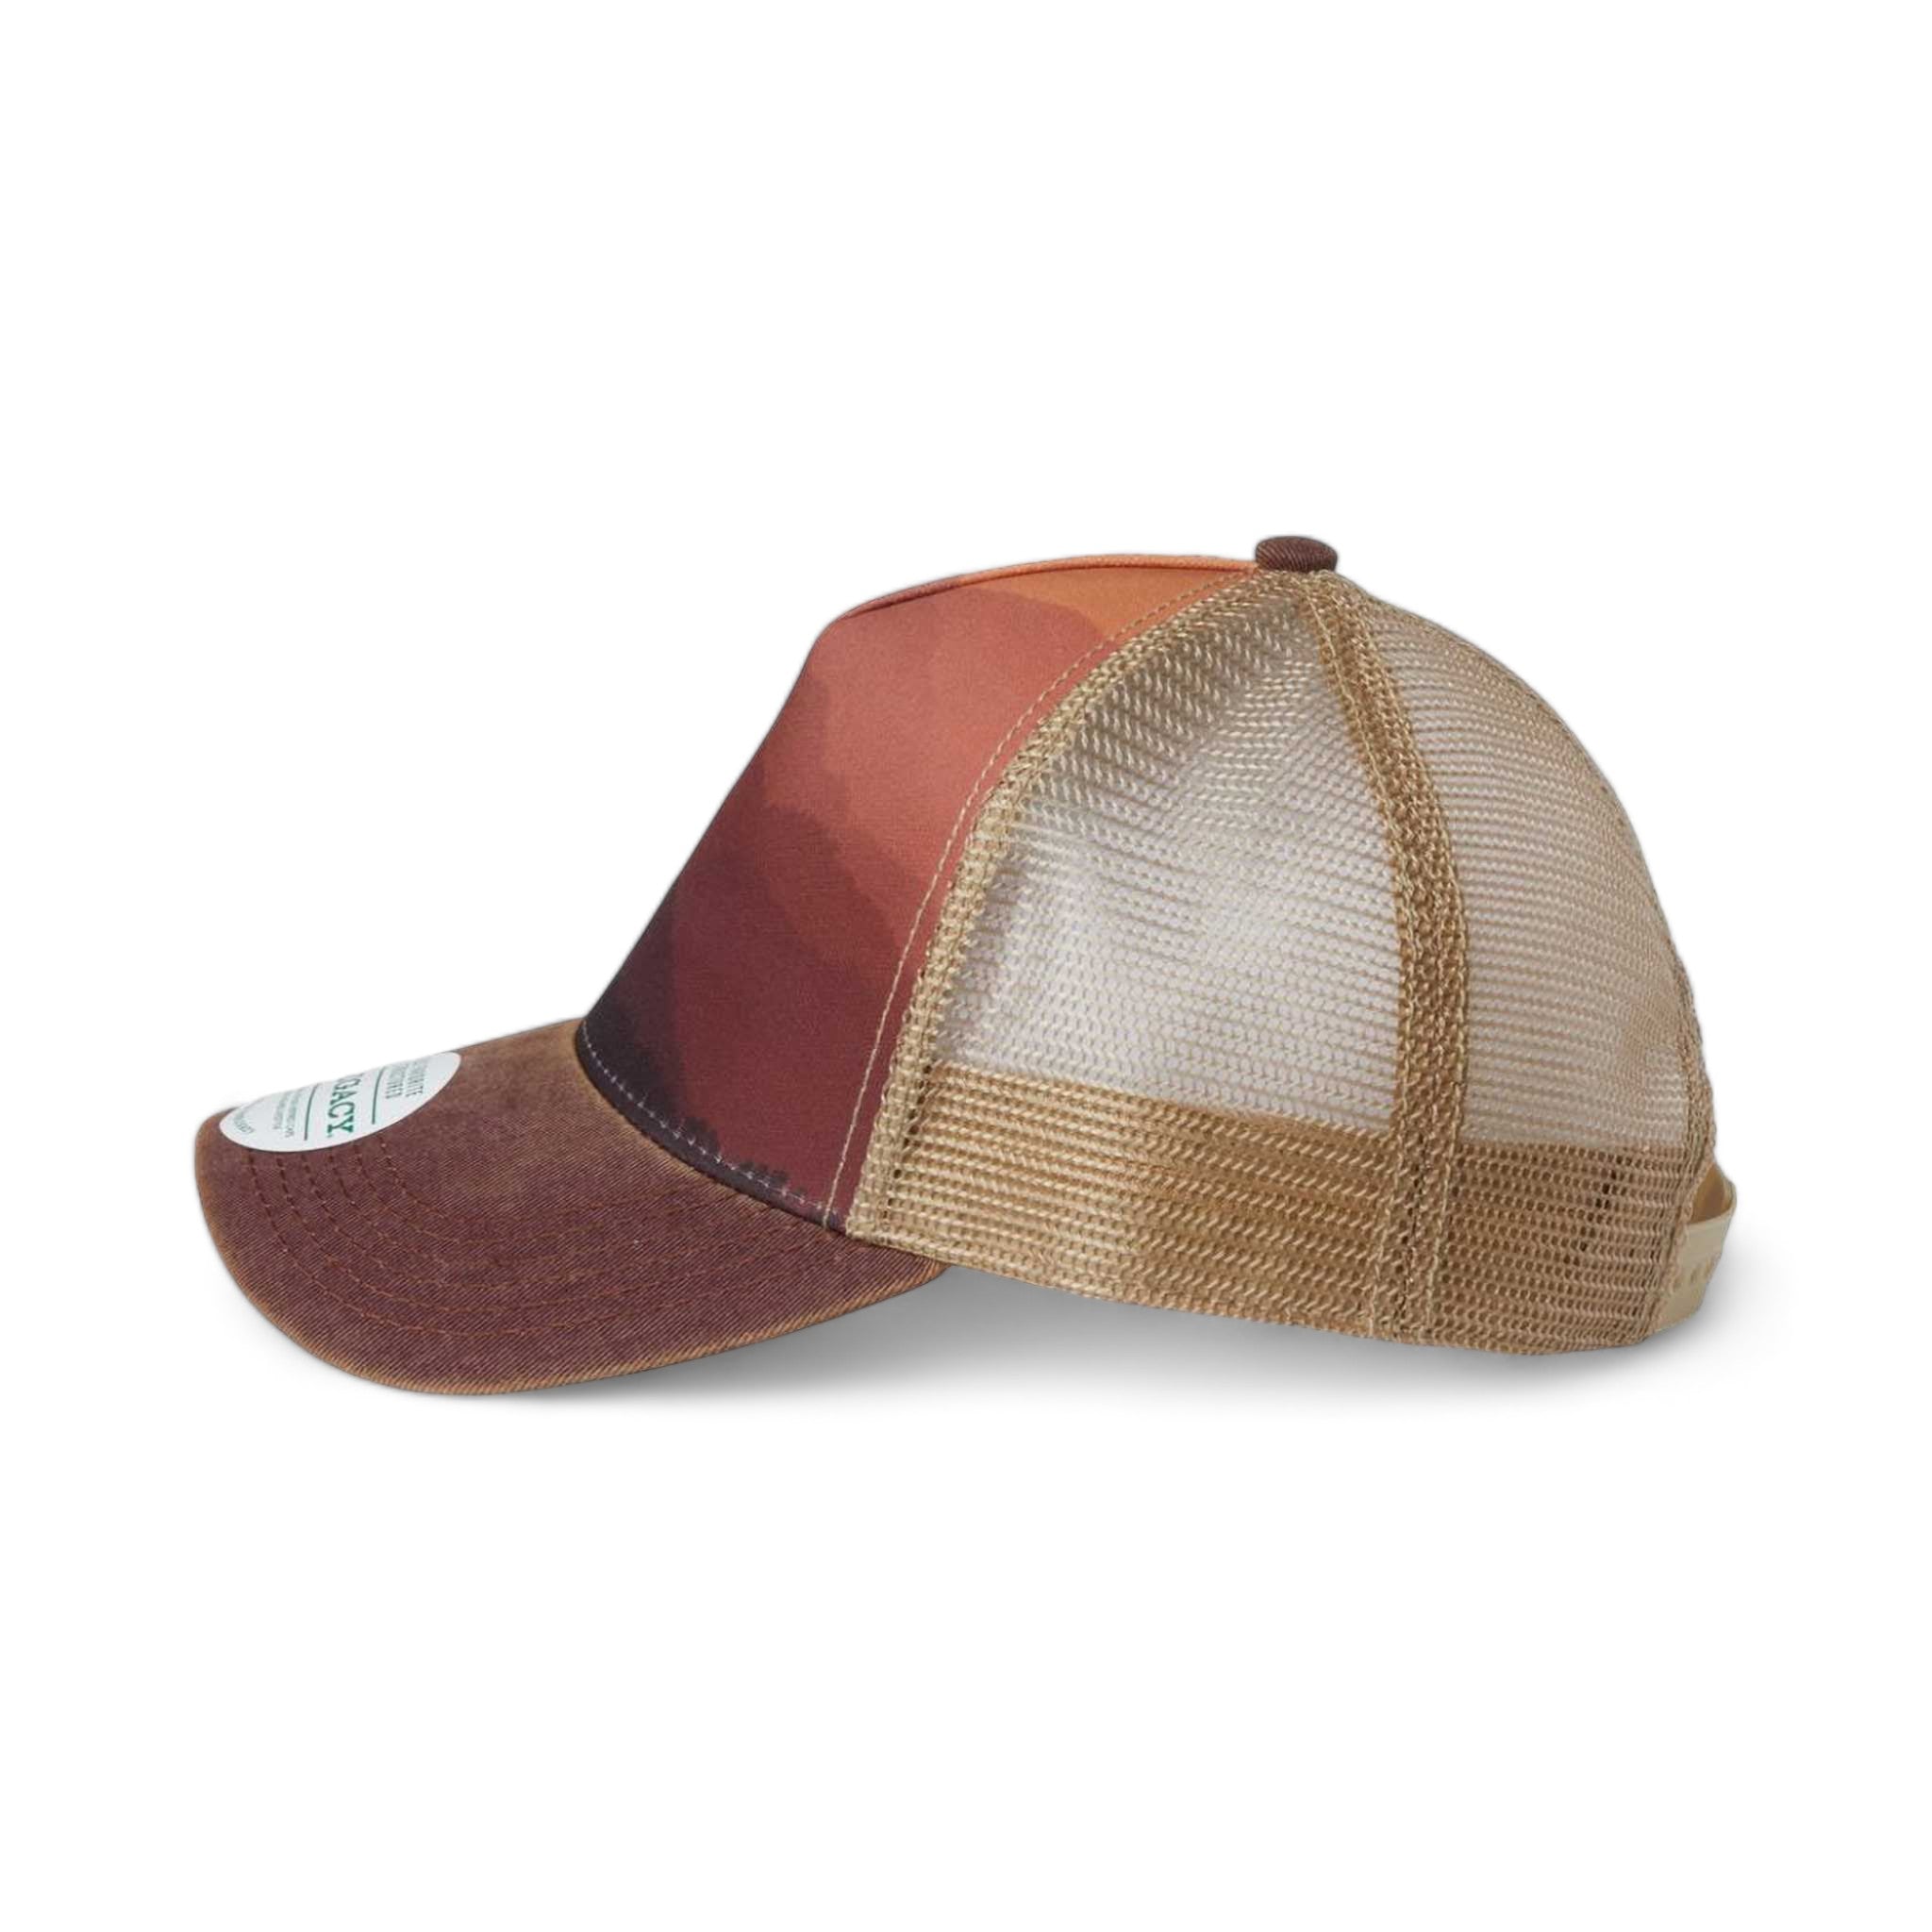 Side view of LEGACY OFAFP custom hat in mt sunset, maroon and khaki